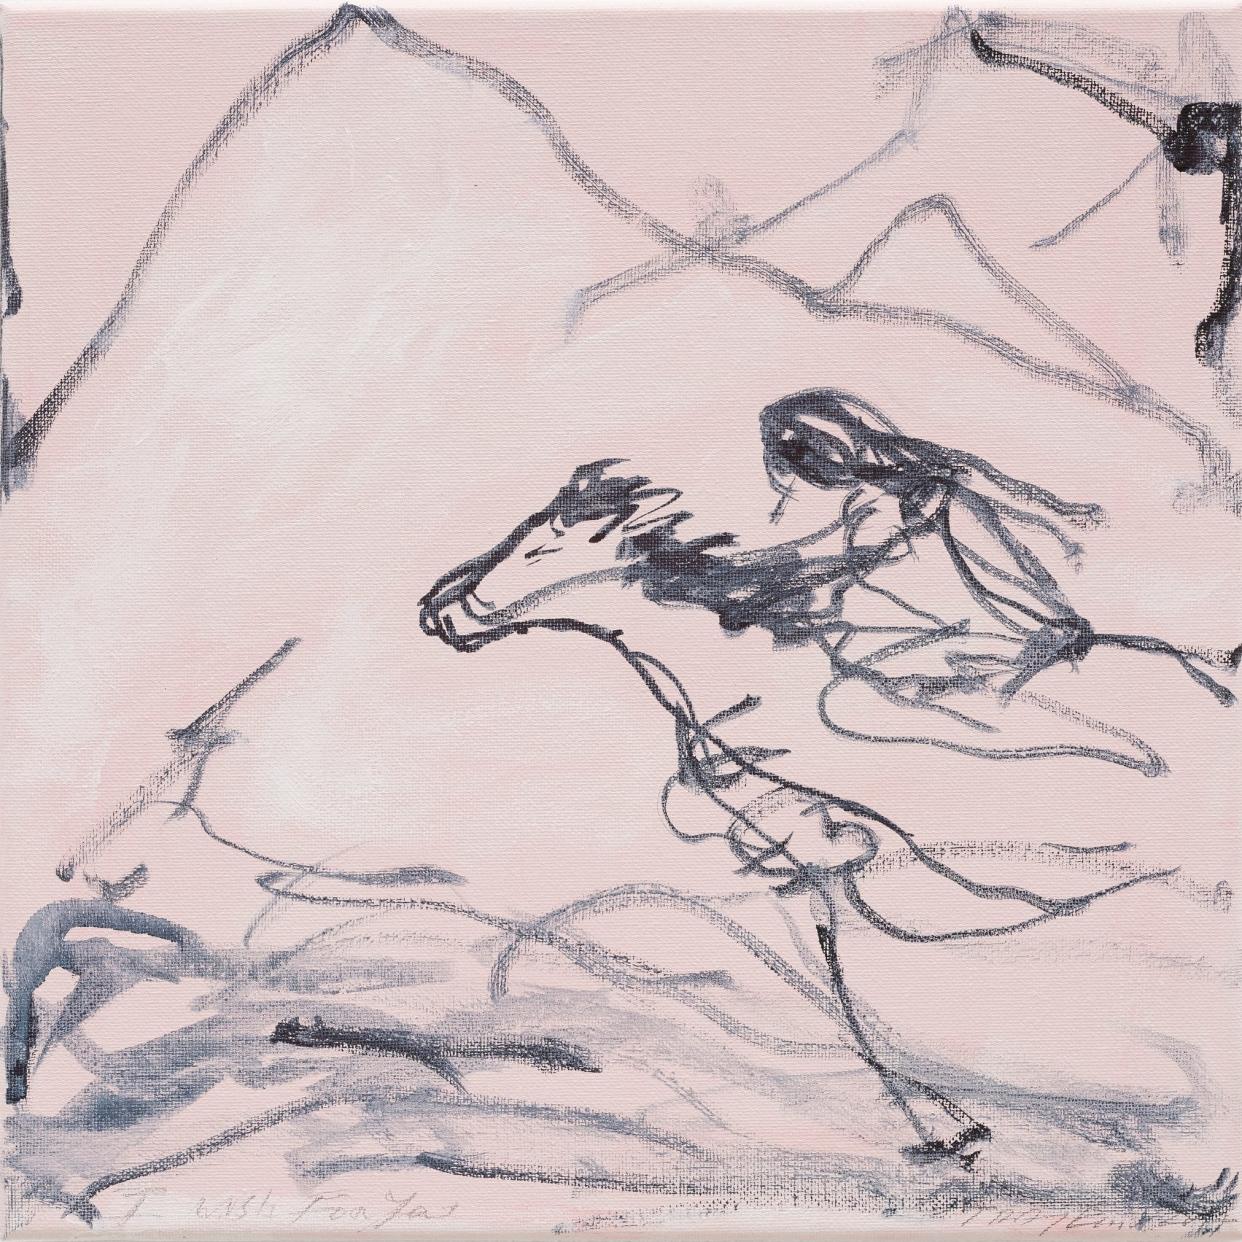 Tracey Emin's girl on horseback in gouache for the Make-A-Wish charity auction at the Serpentine